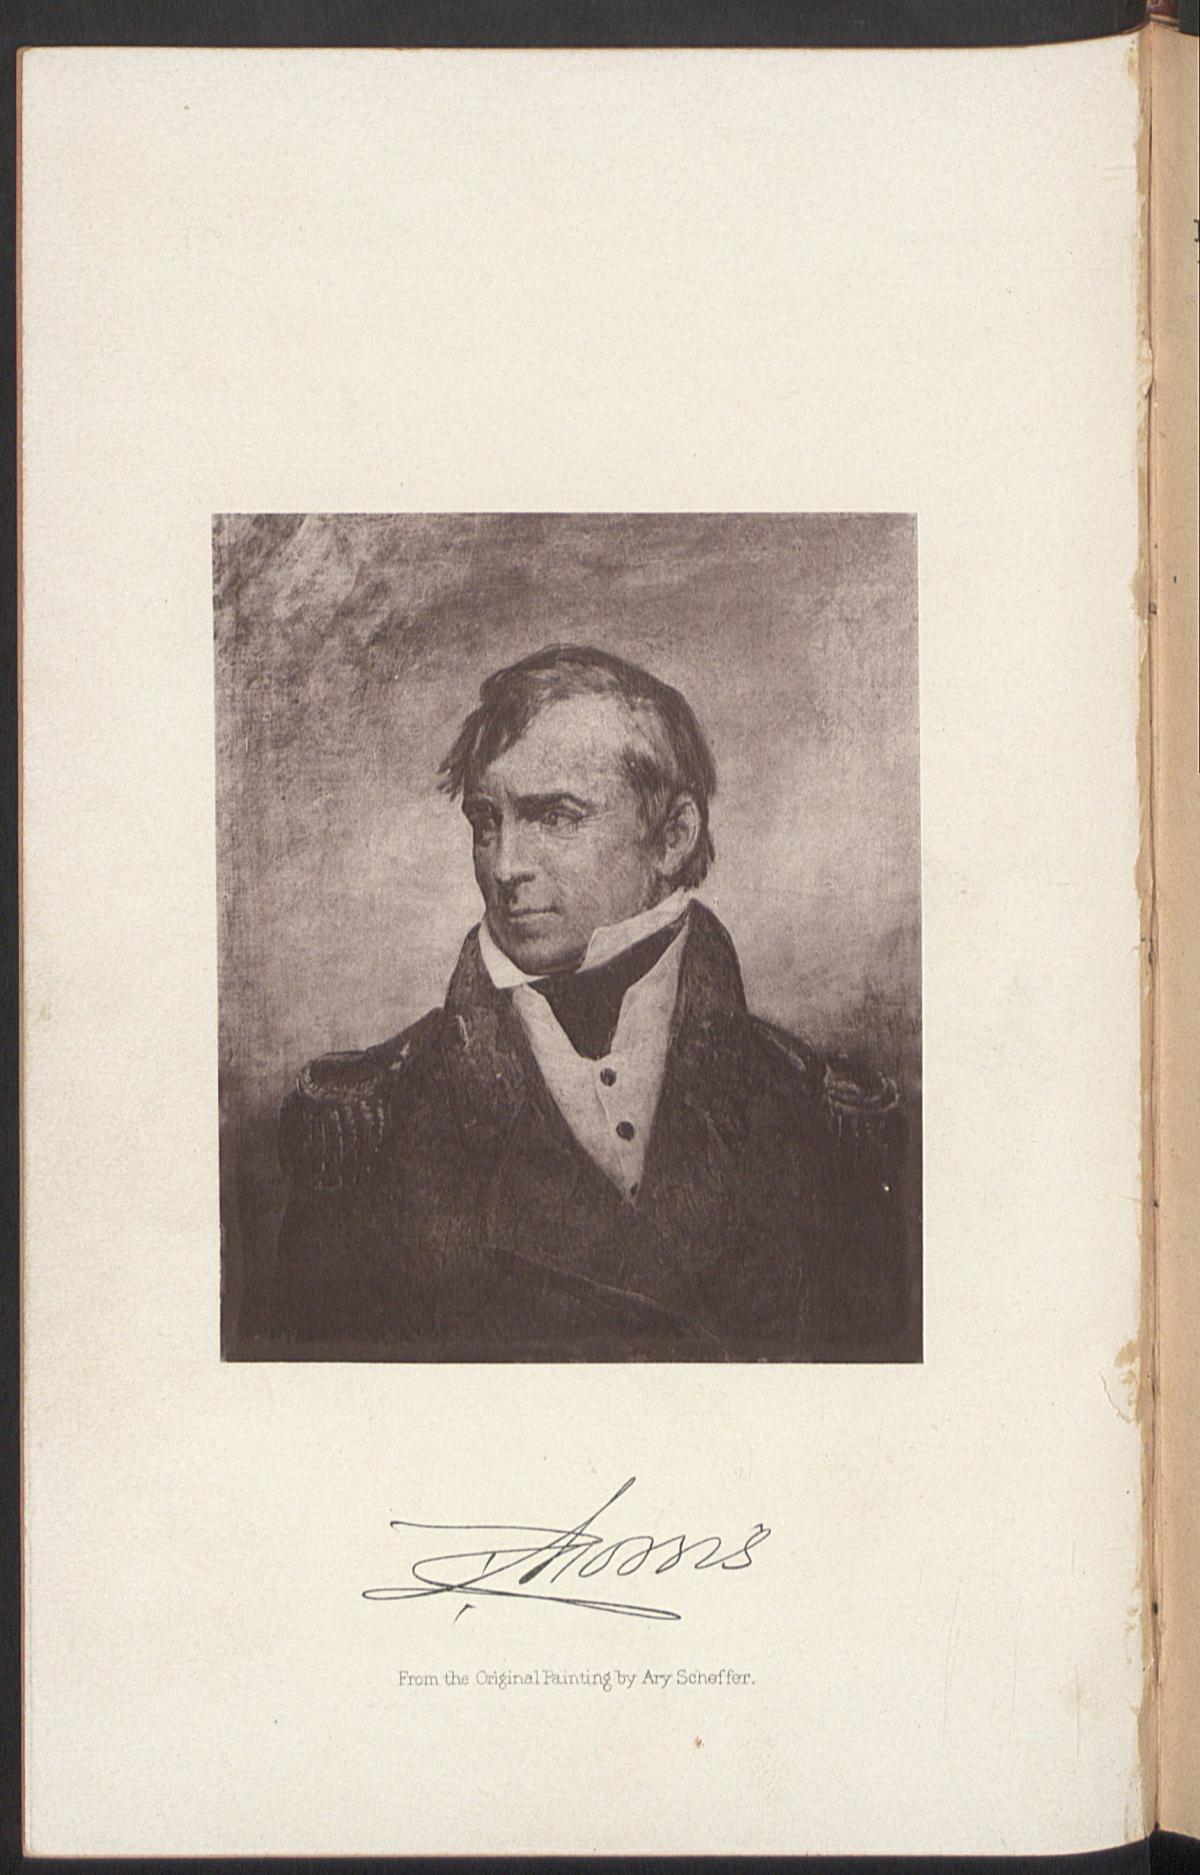 Charles Morris, from the Original Painting by Ary Scheffer